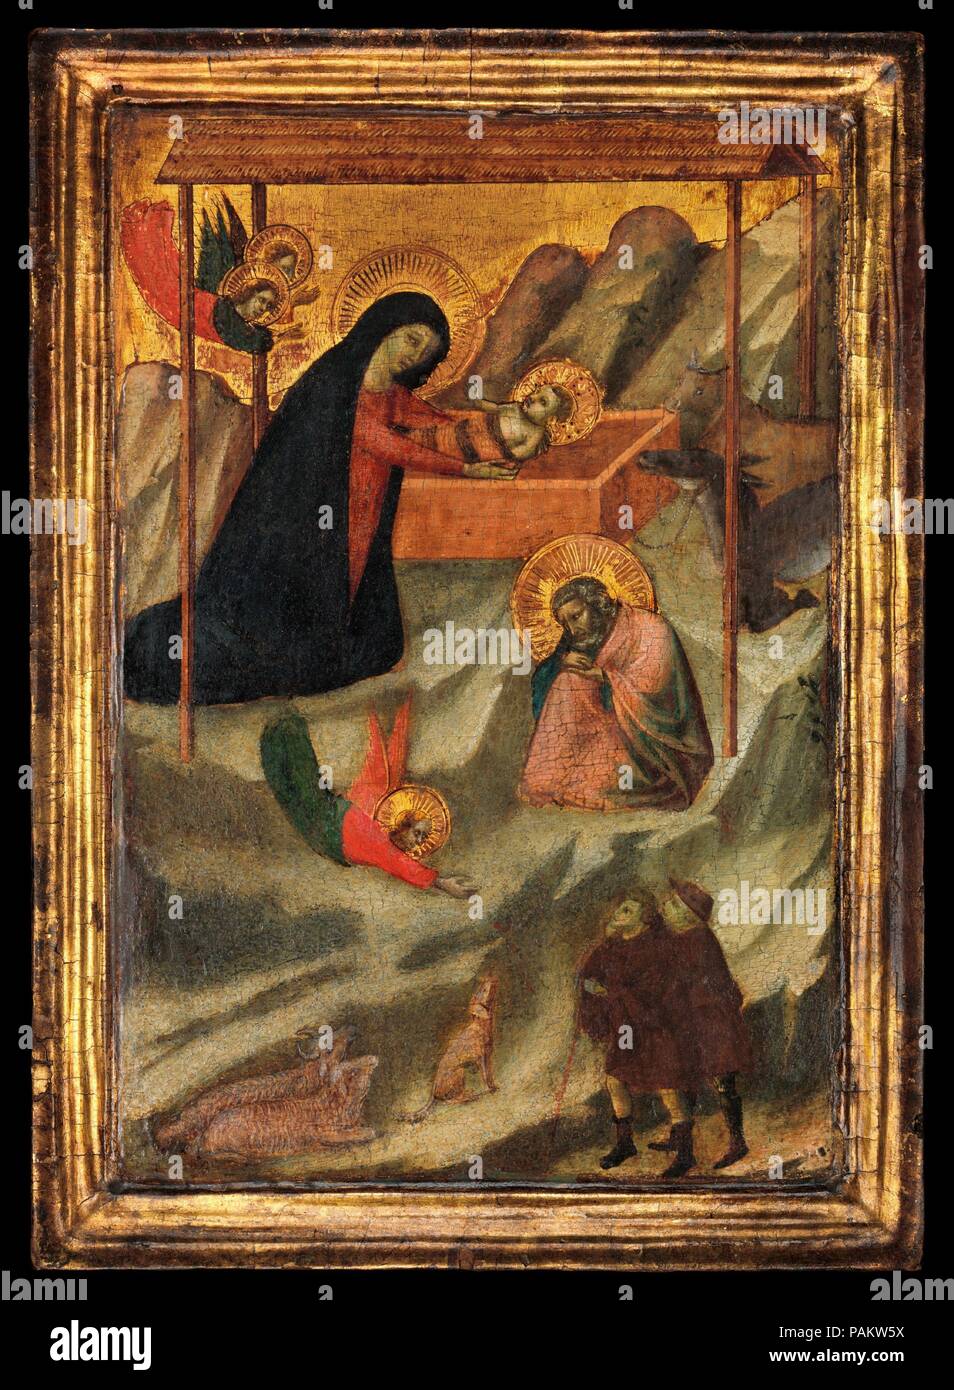 The Nativity. Artist: Maestro Daddesco (Italian, Florence, active ca. 1320-40). Dimensions: Overall, with engaged frame, 11 5/8 x 8 3/8 in. (29.5 x 21.3 cm); painted surface 8 1/2 x 6 7/8 in. (21.6 x 17.5 cm). Former Attribution: Follower of Bernardo Daddi (Italian, Florence (?) ca. 1290-1348 Florence). Date: ca. 1320-40. Museum: Metropolitan Museum of Art, New York, USA. Stock Photo